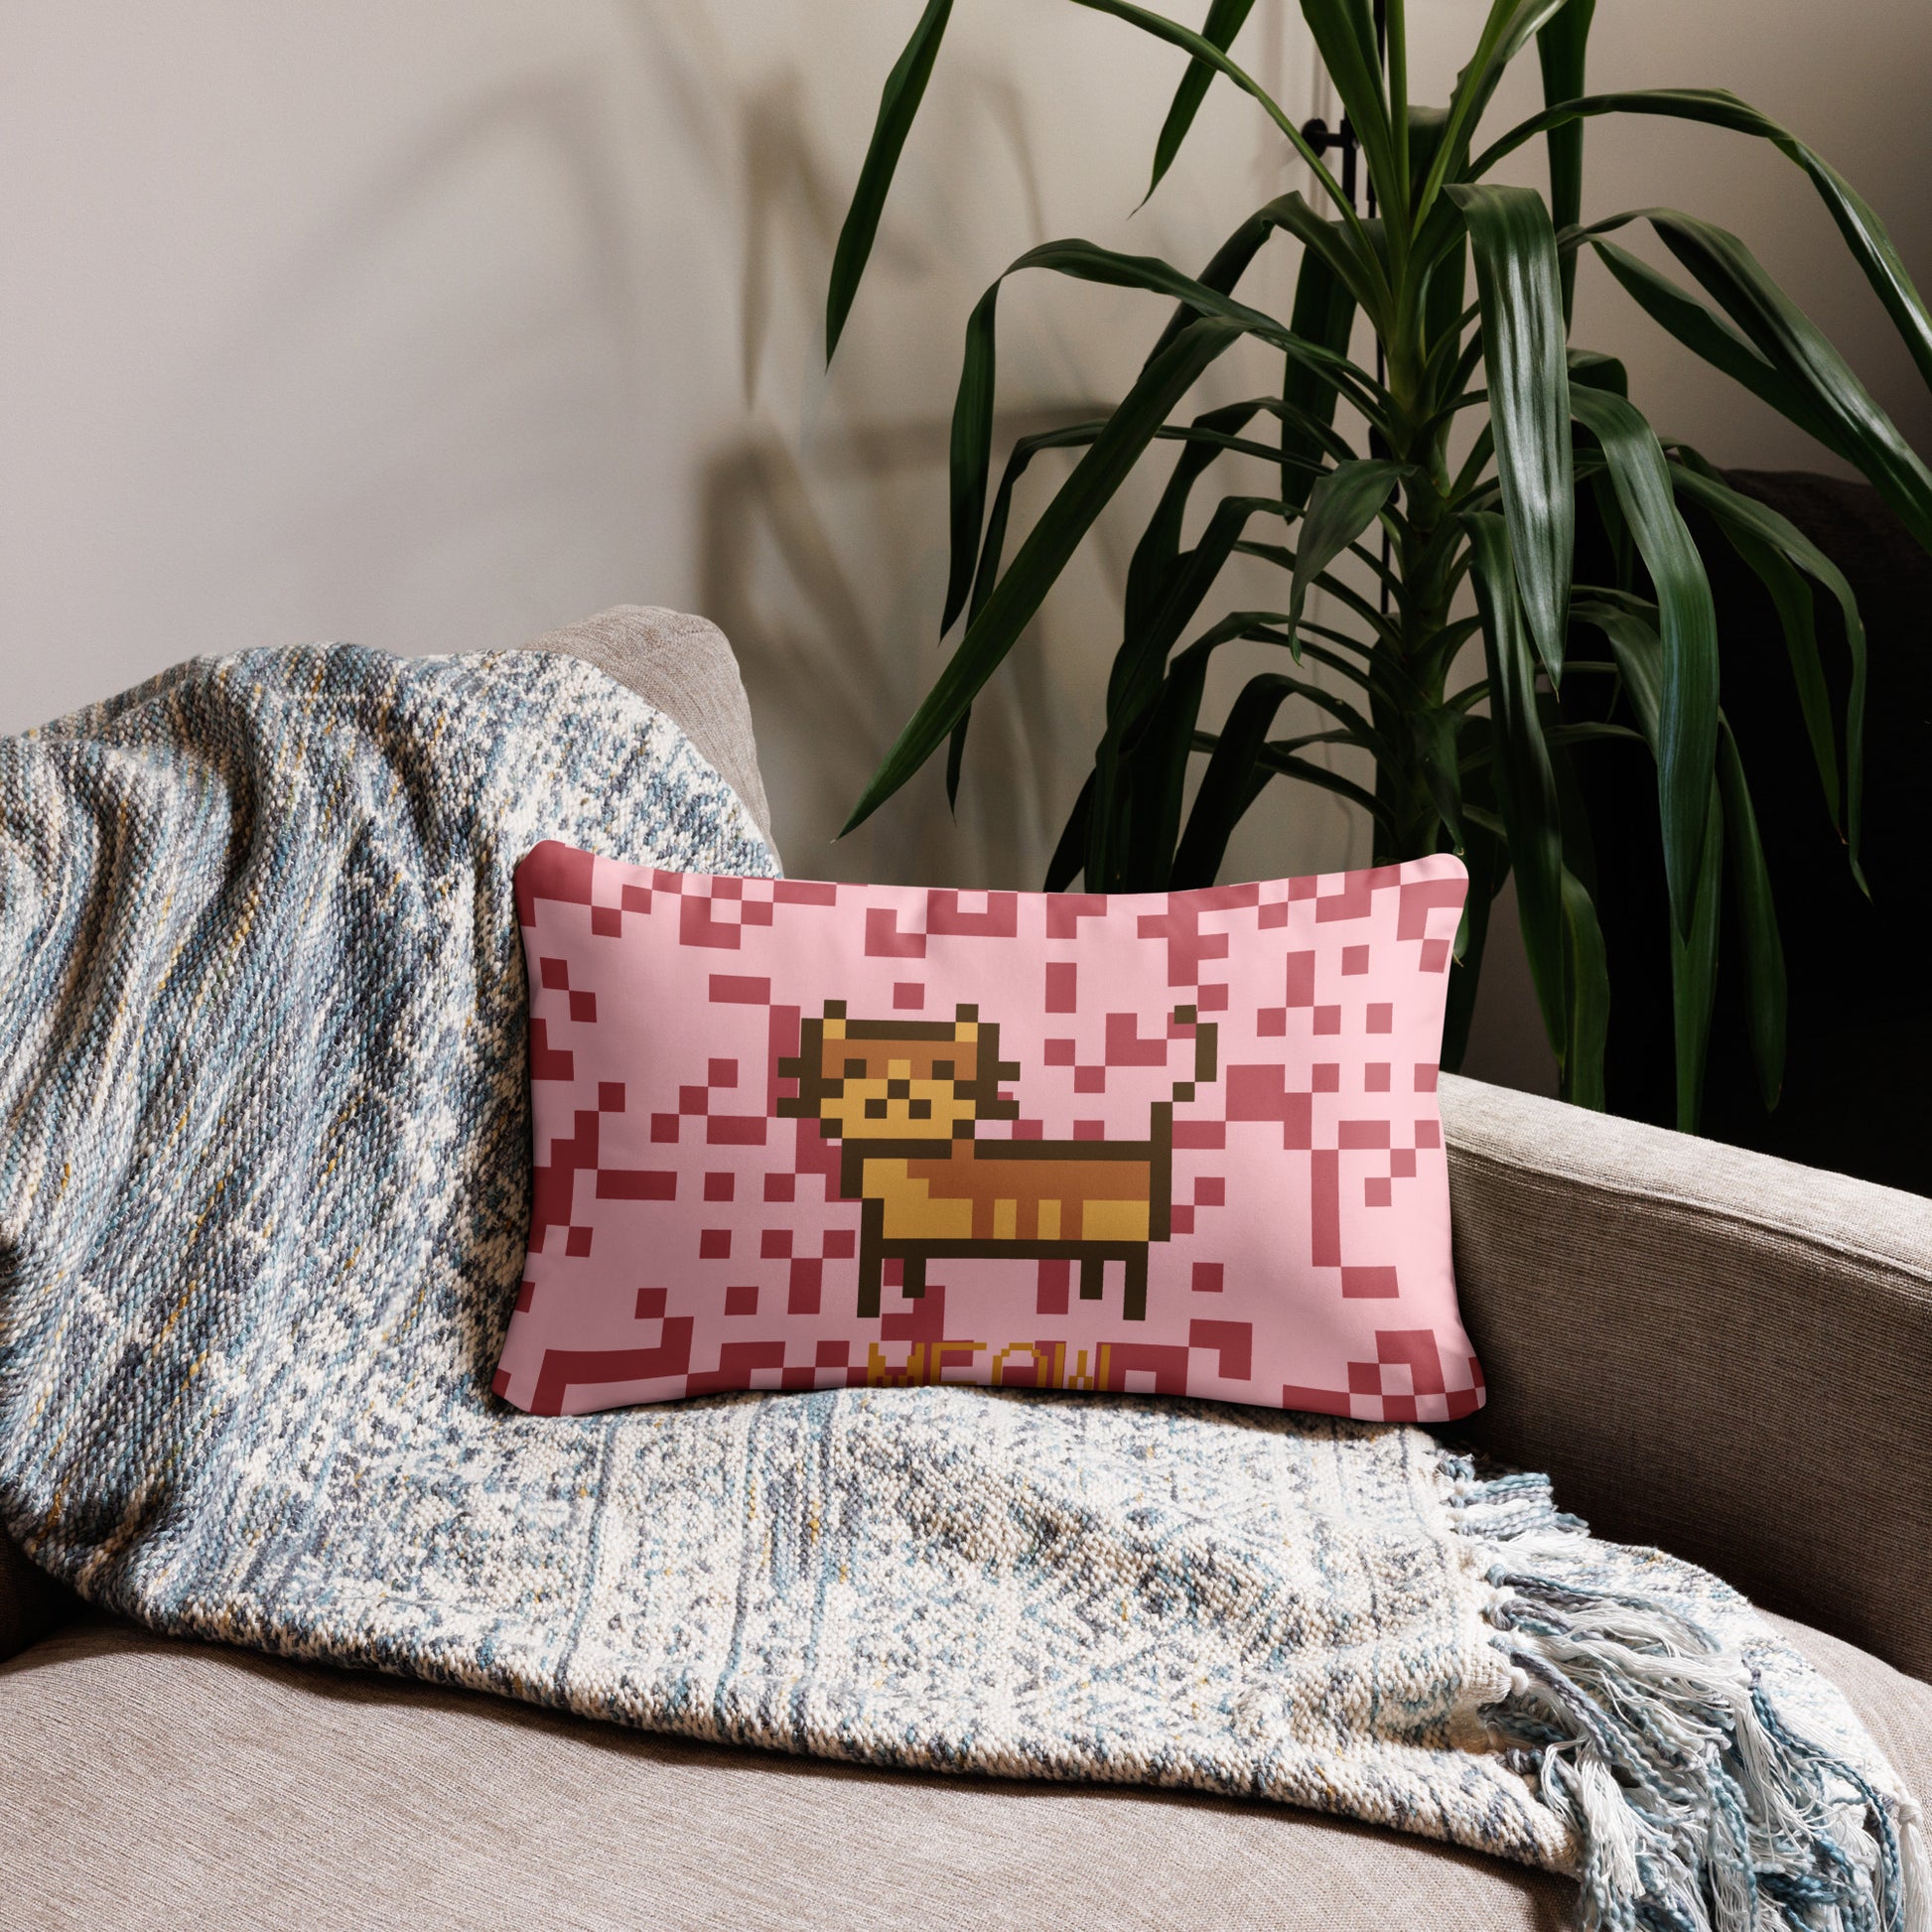 Pink pillow with a pixel photo of a cat and the text MEOW